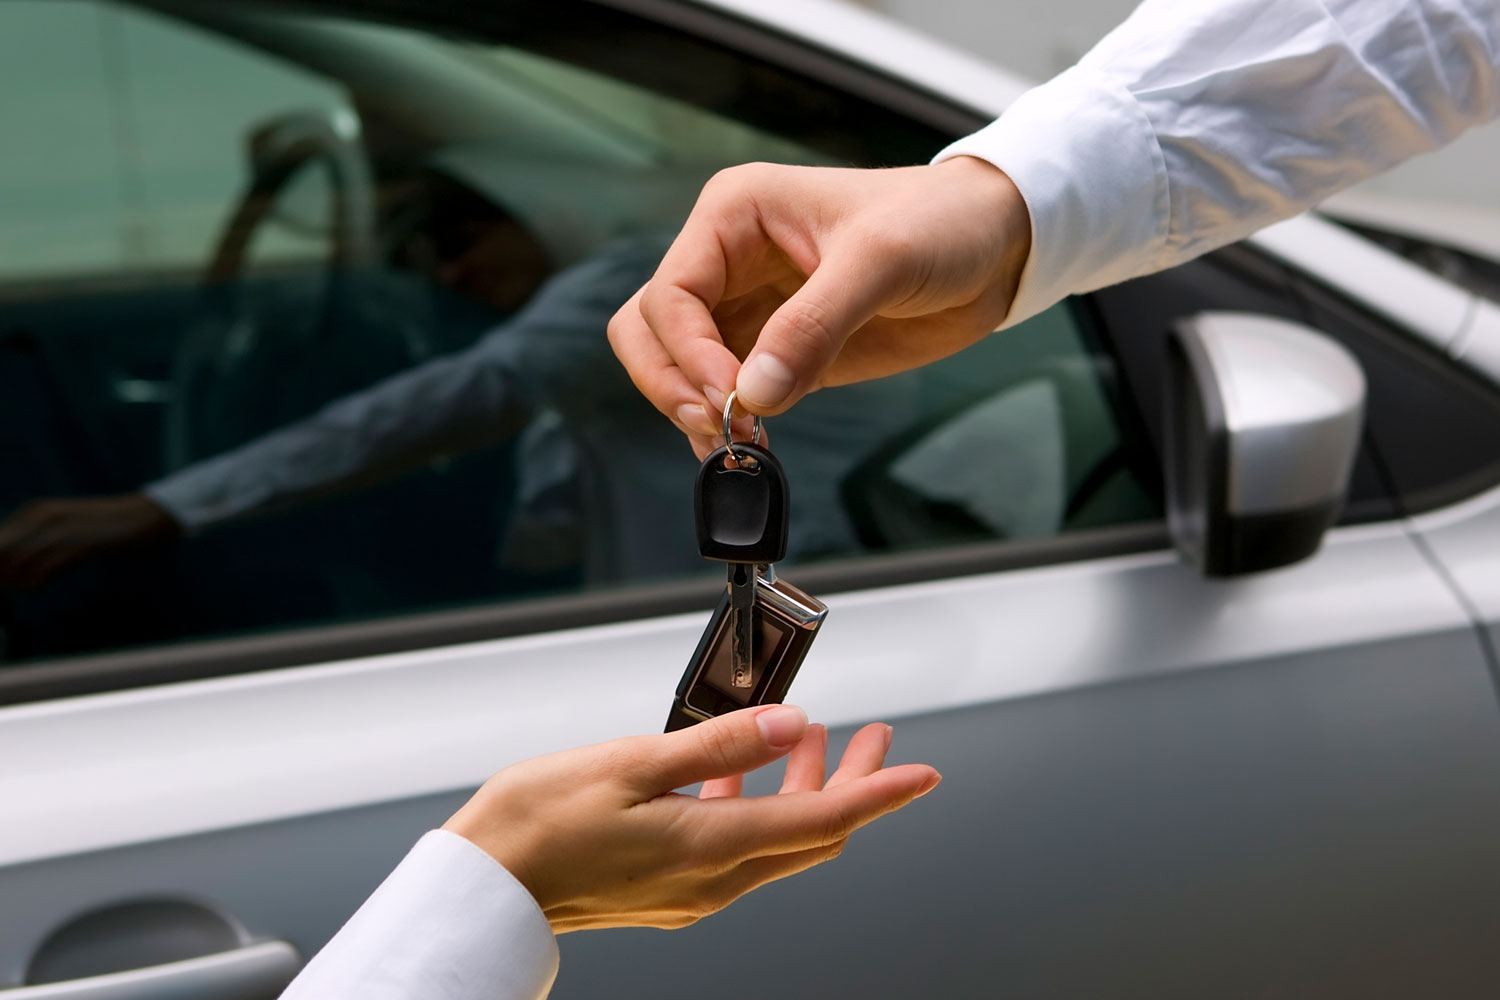 Mercedes Benz Car Key Replacement: Why You Need a Locksmith